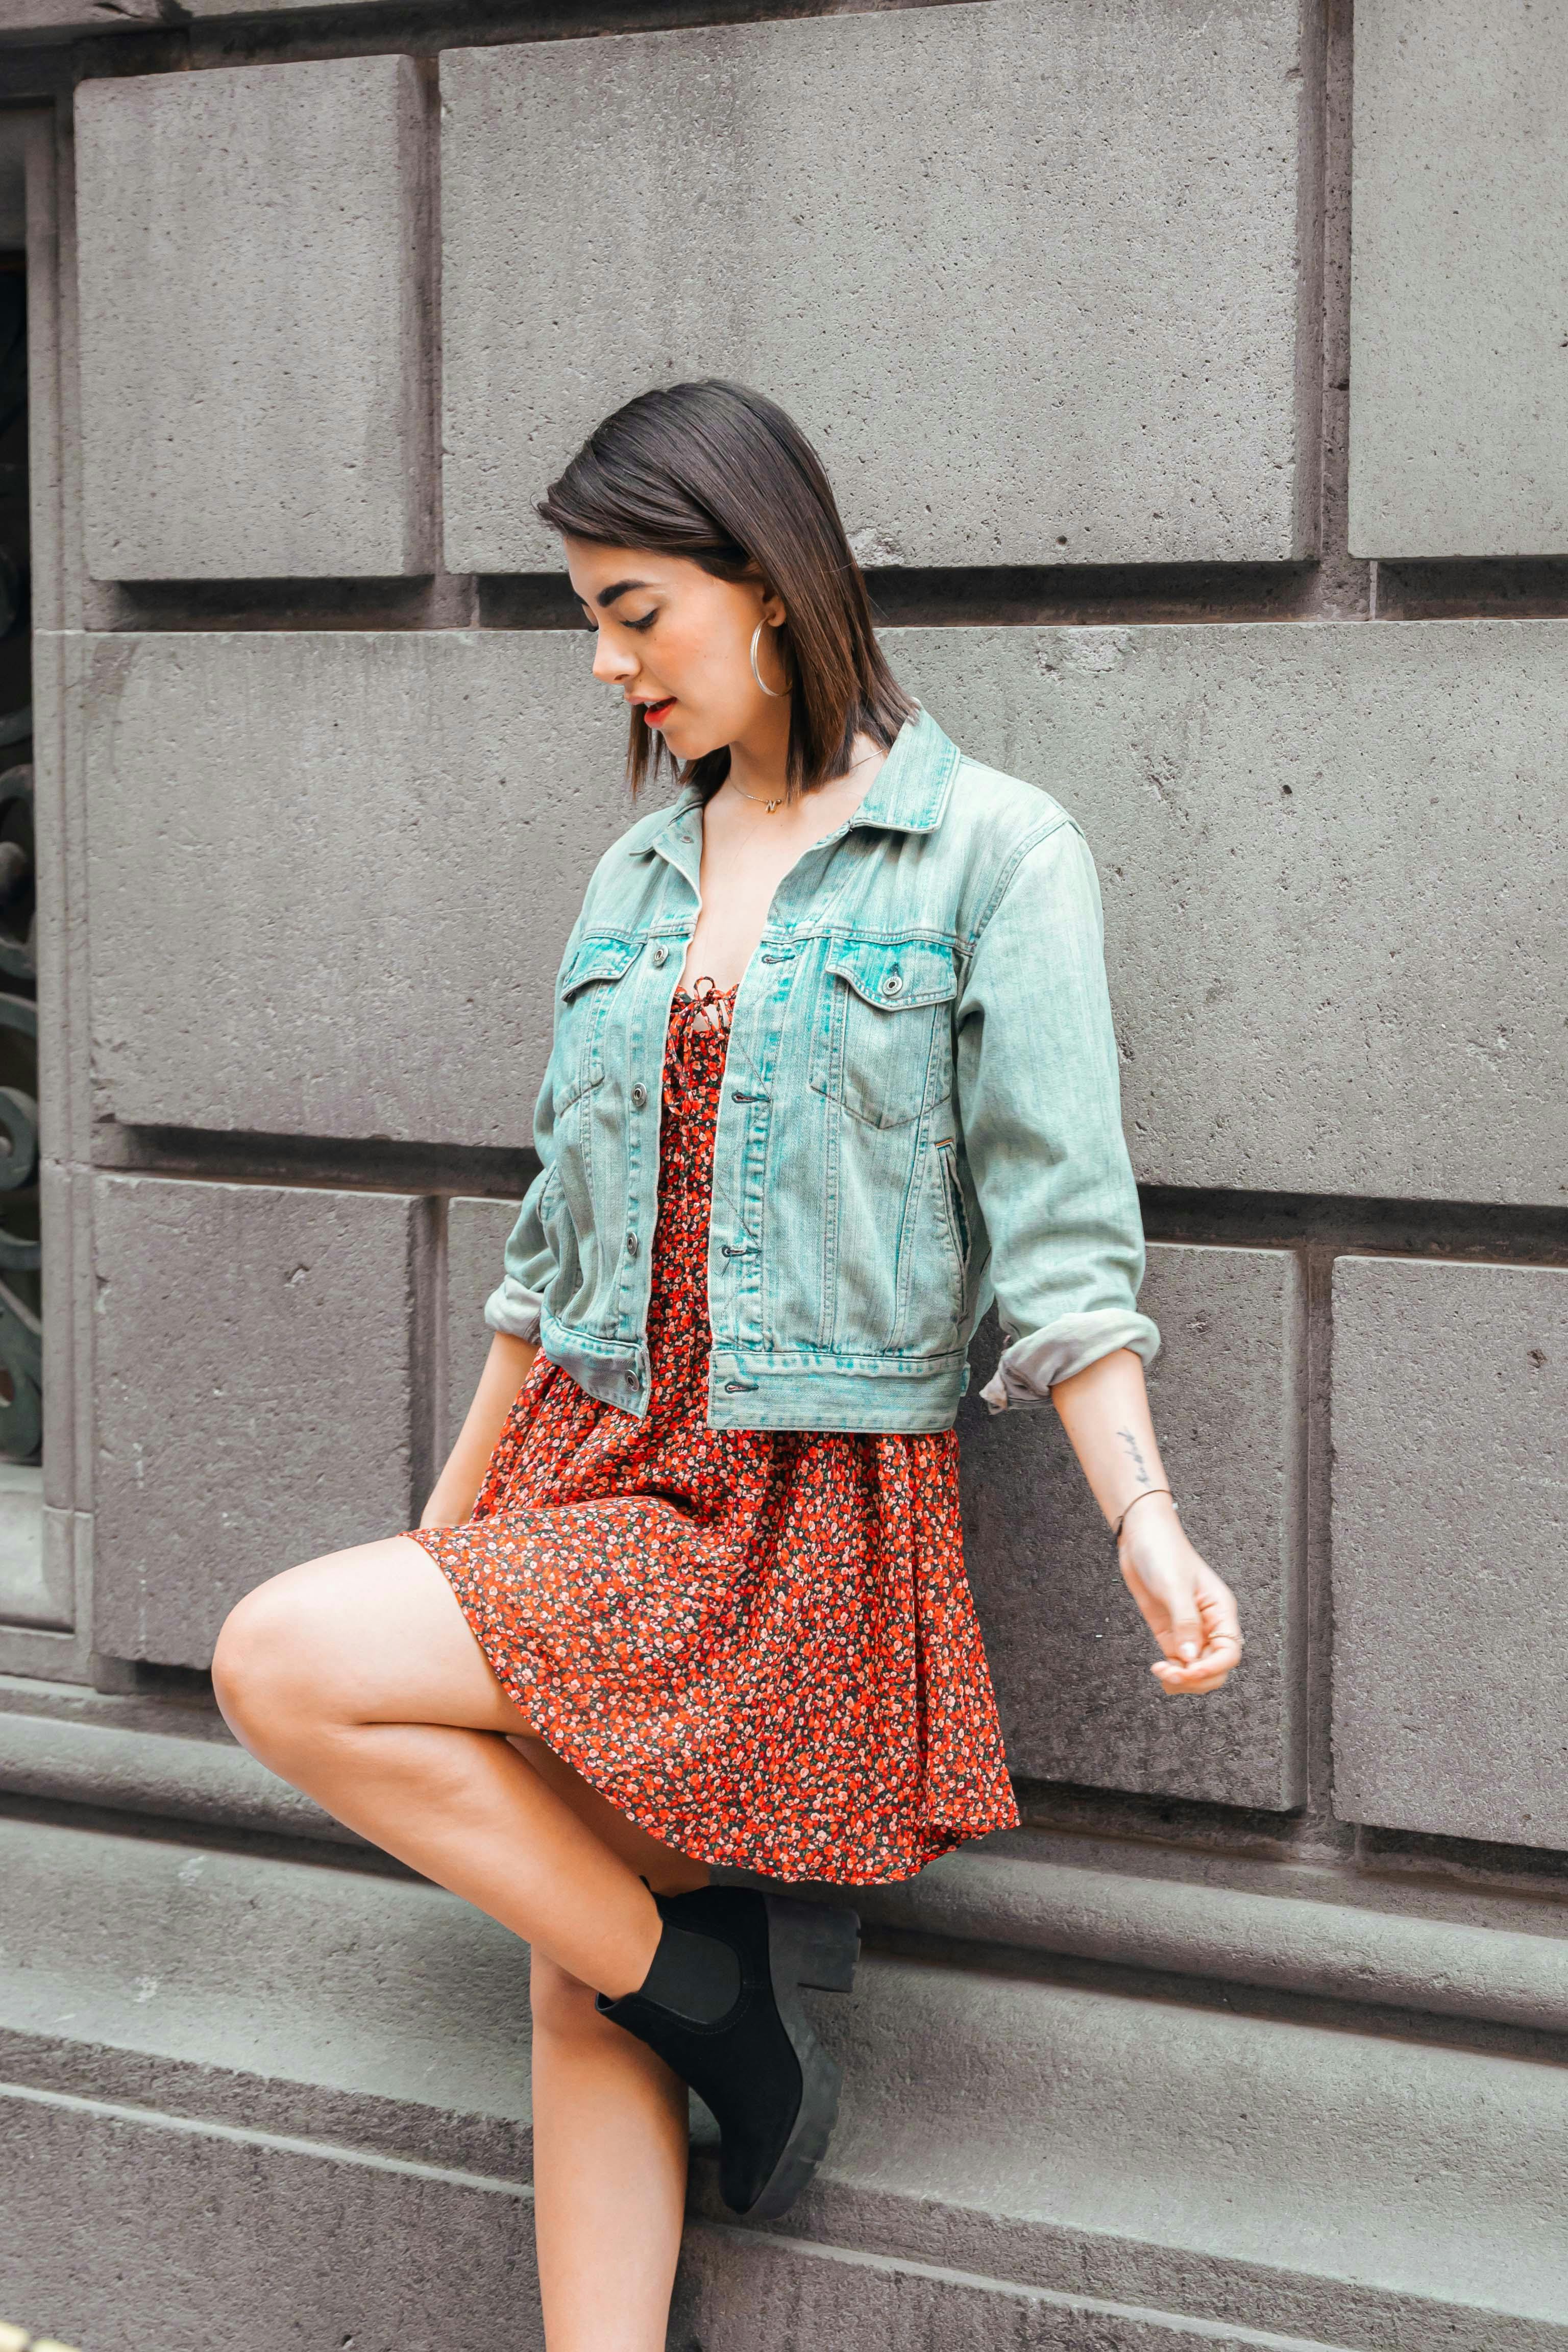 OOTD - Summer to Fall with a Denim Jacket and Booties | La Petite Noob | A  Toronto-Based Fashion and Lifestyle Blog.